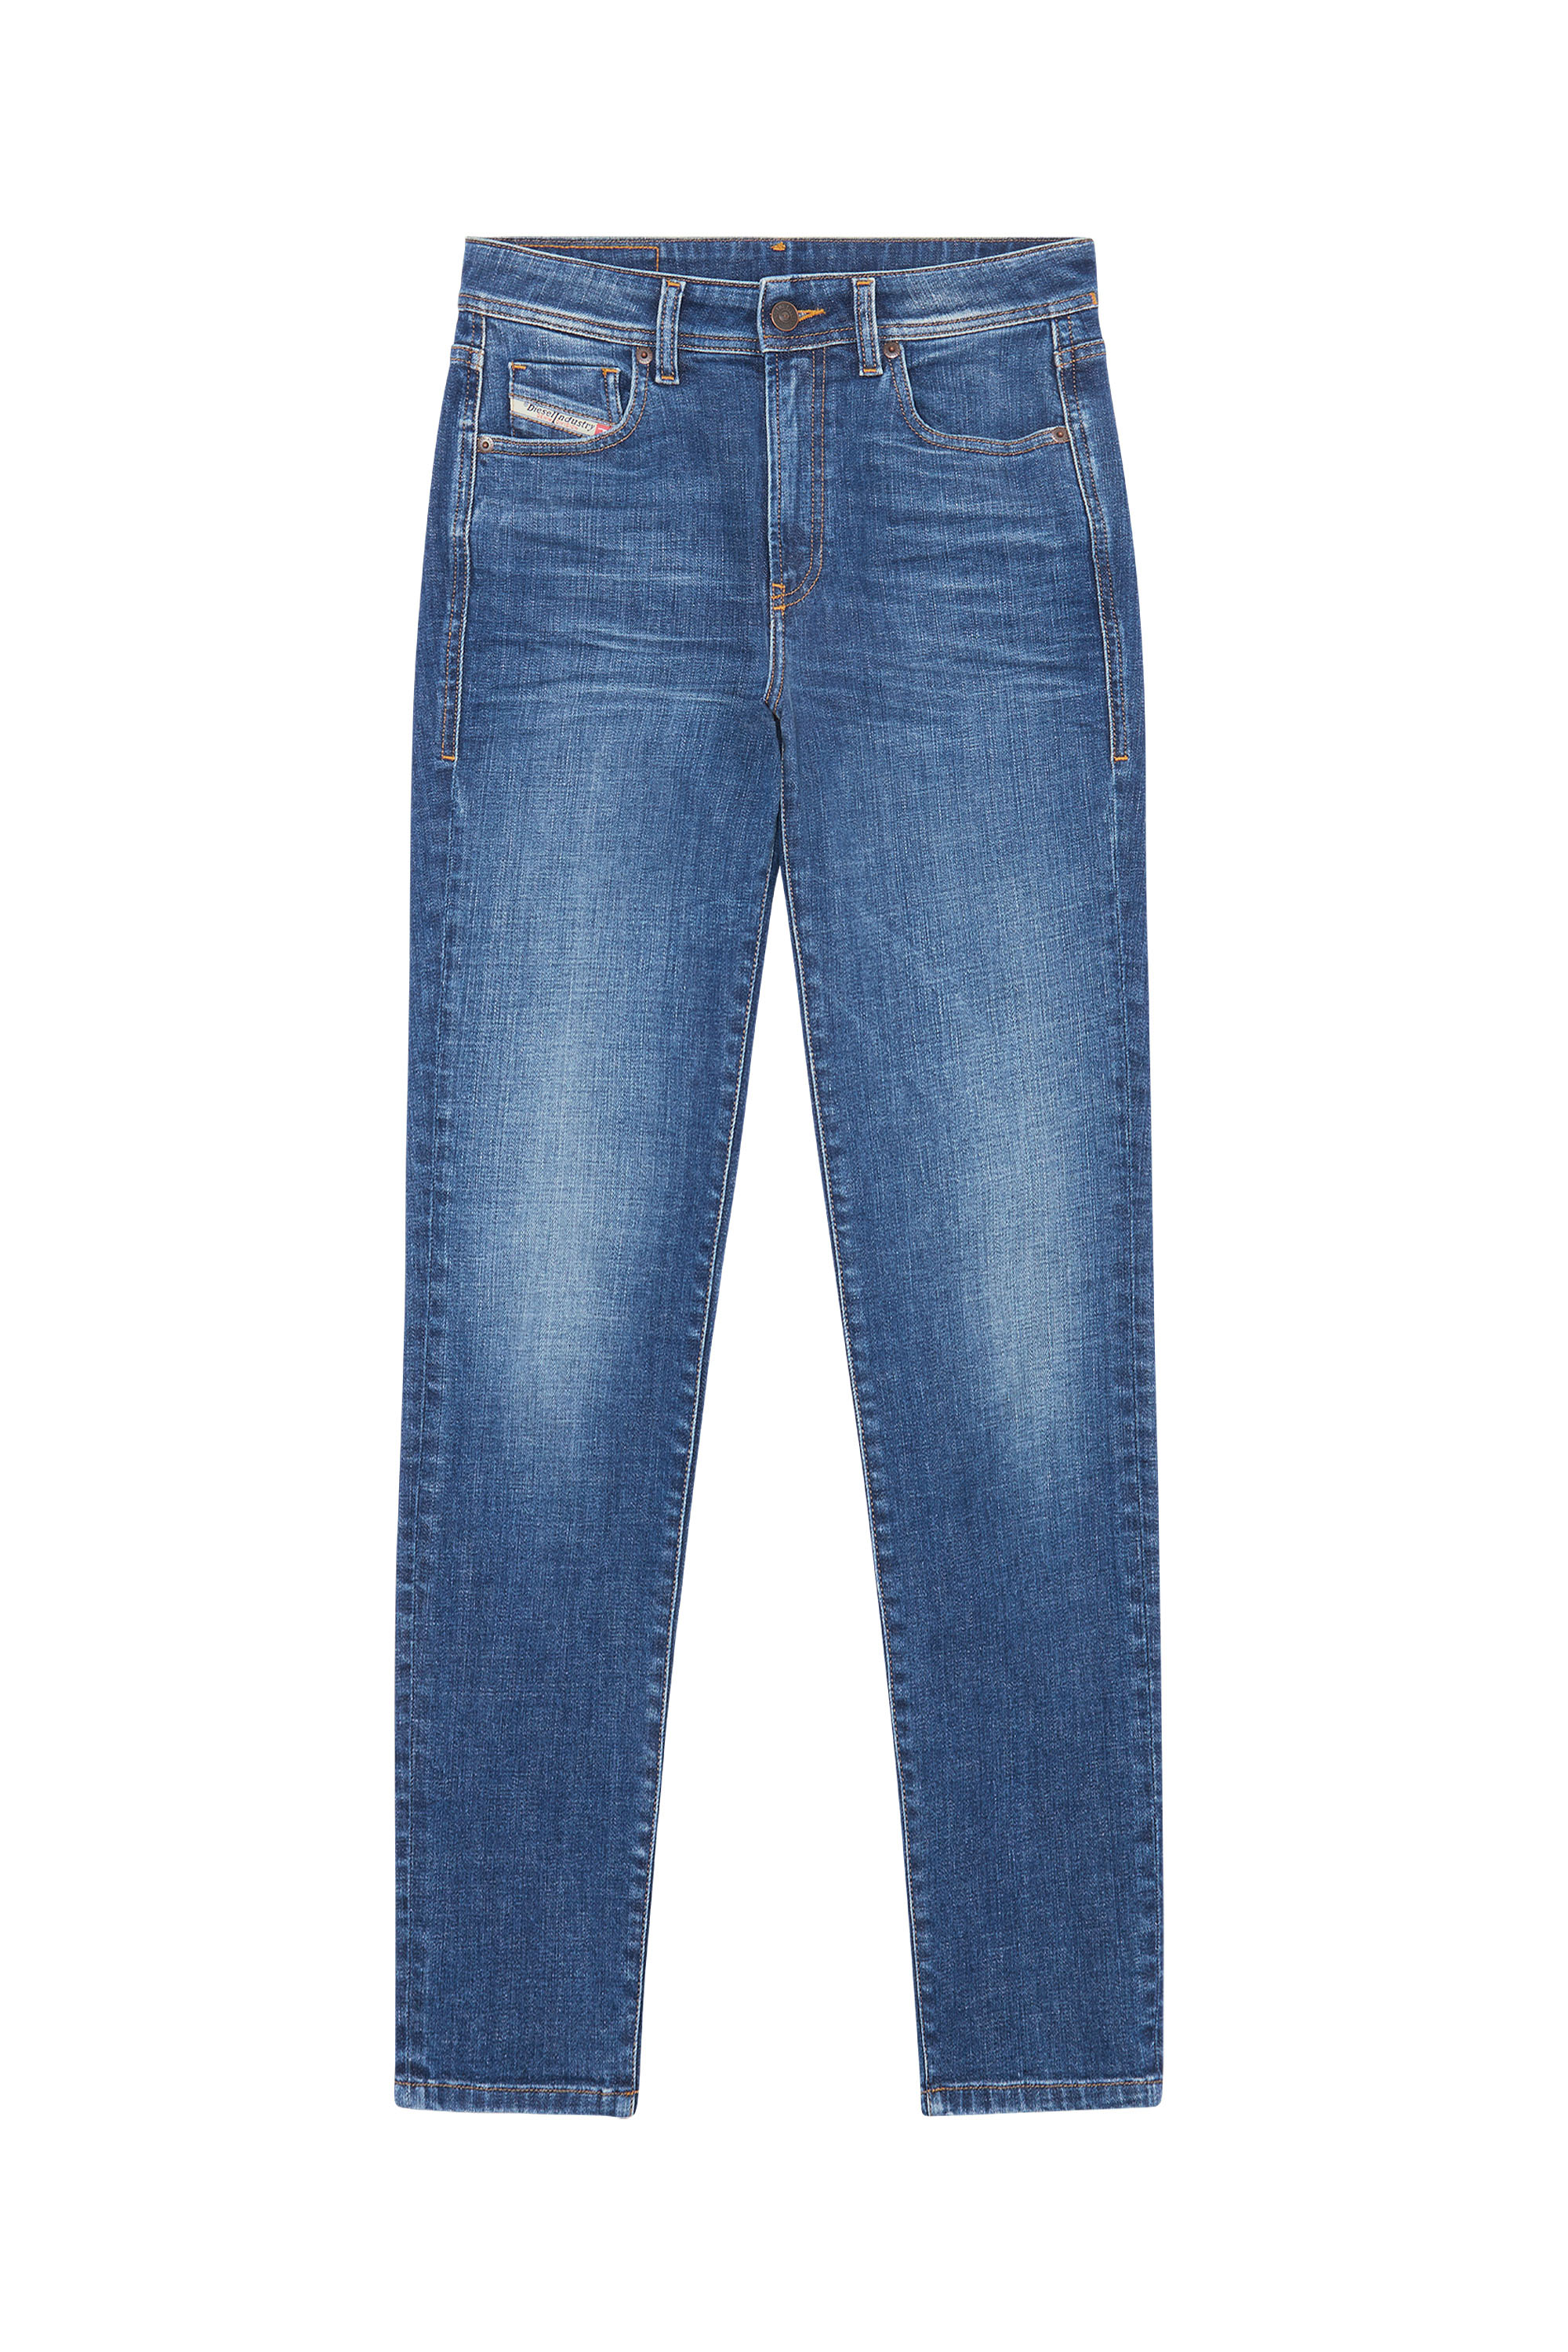 2004 09D46 Tapered Jeans, Medium blue - Jeans